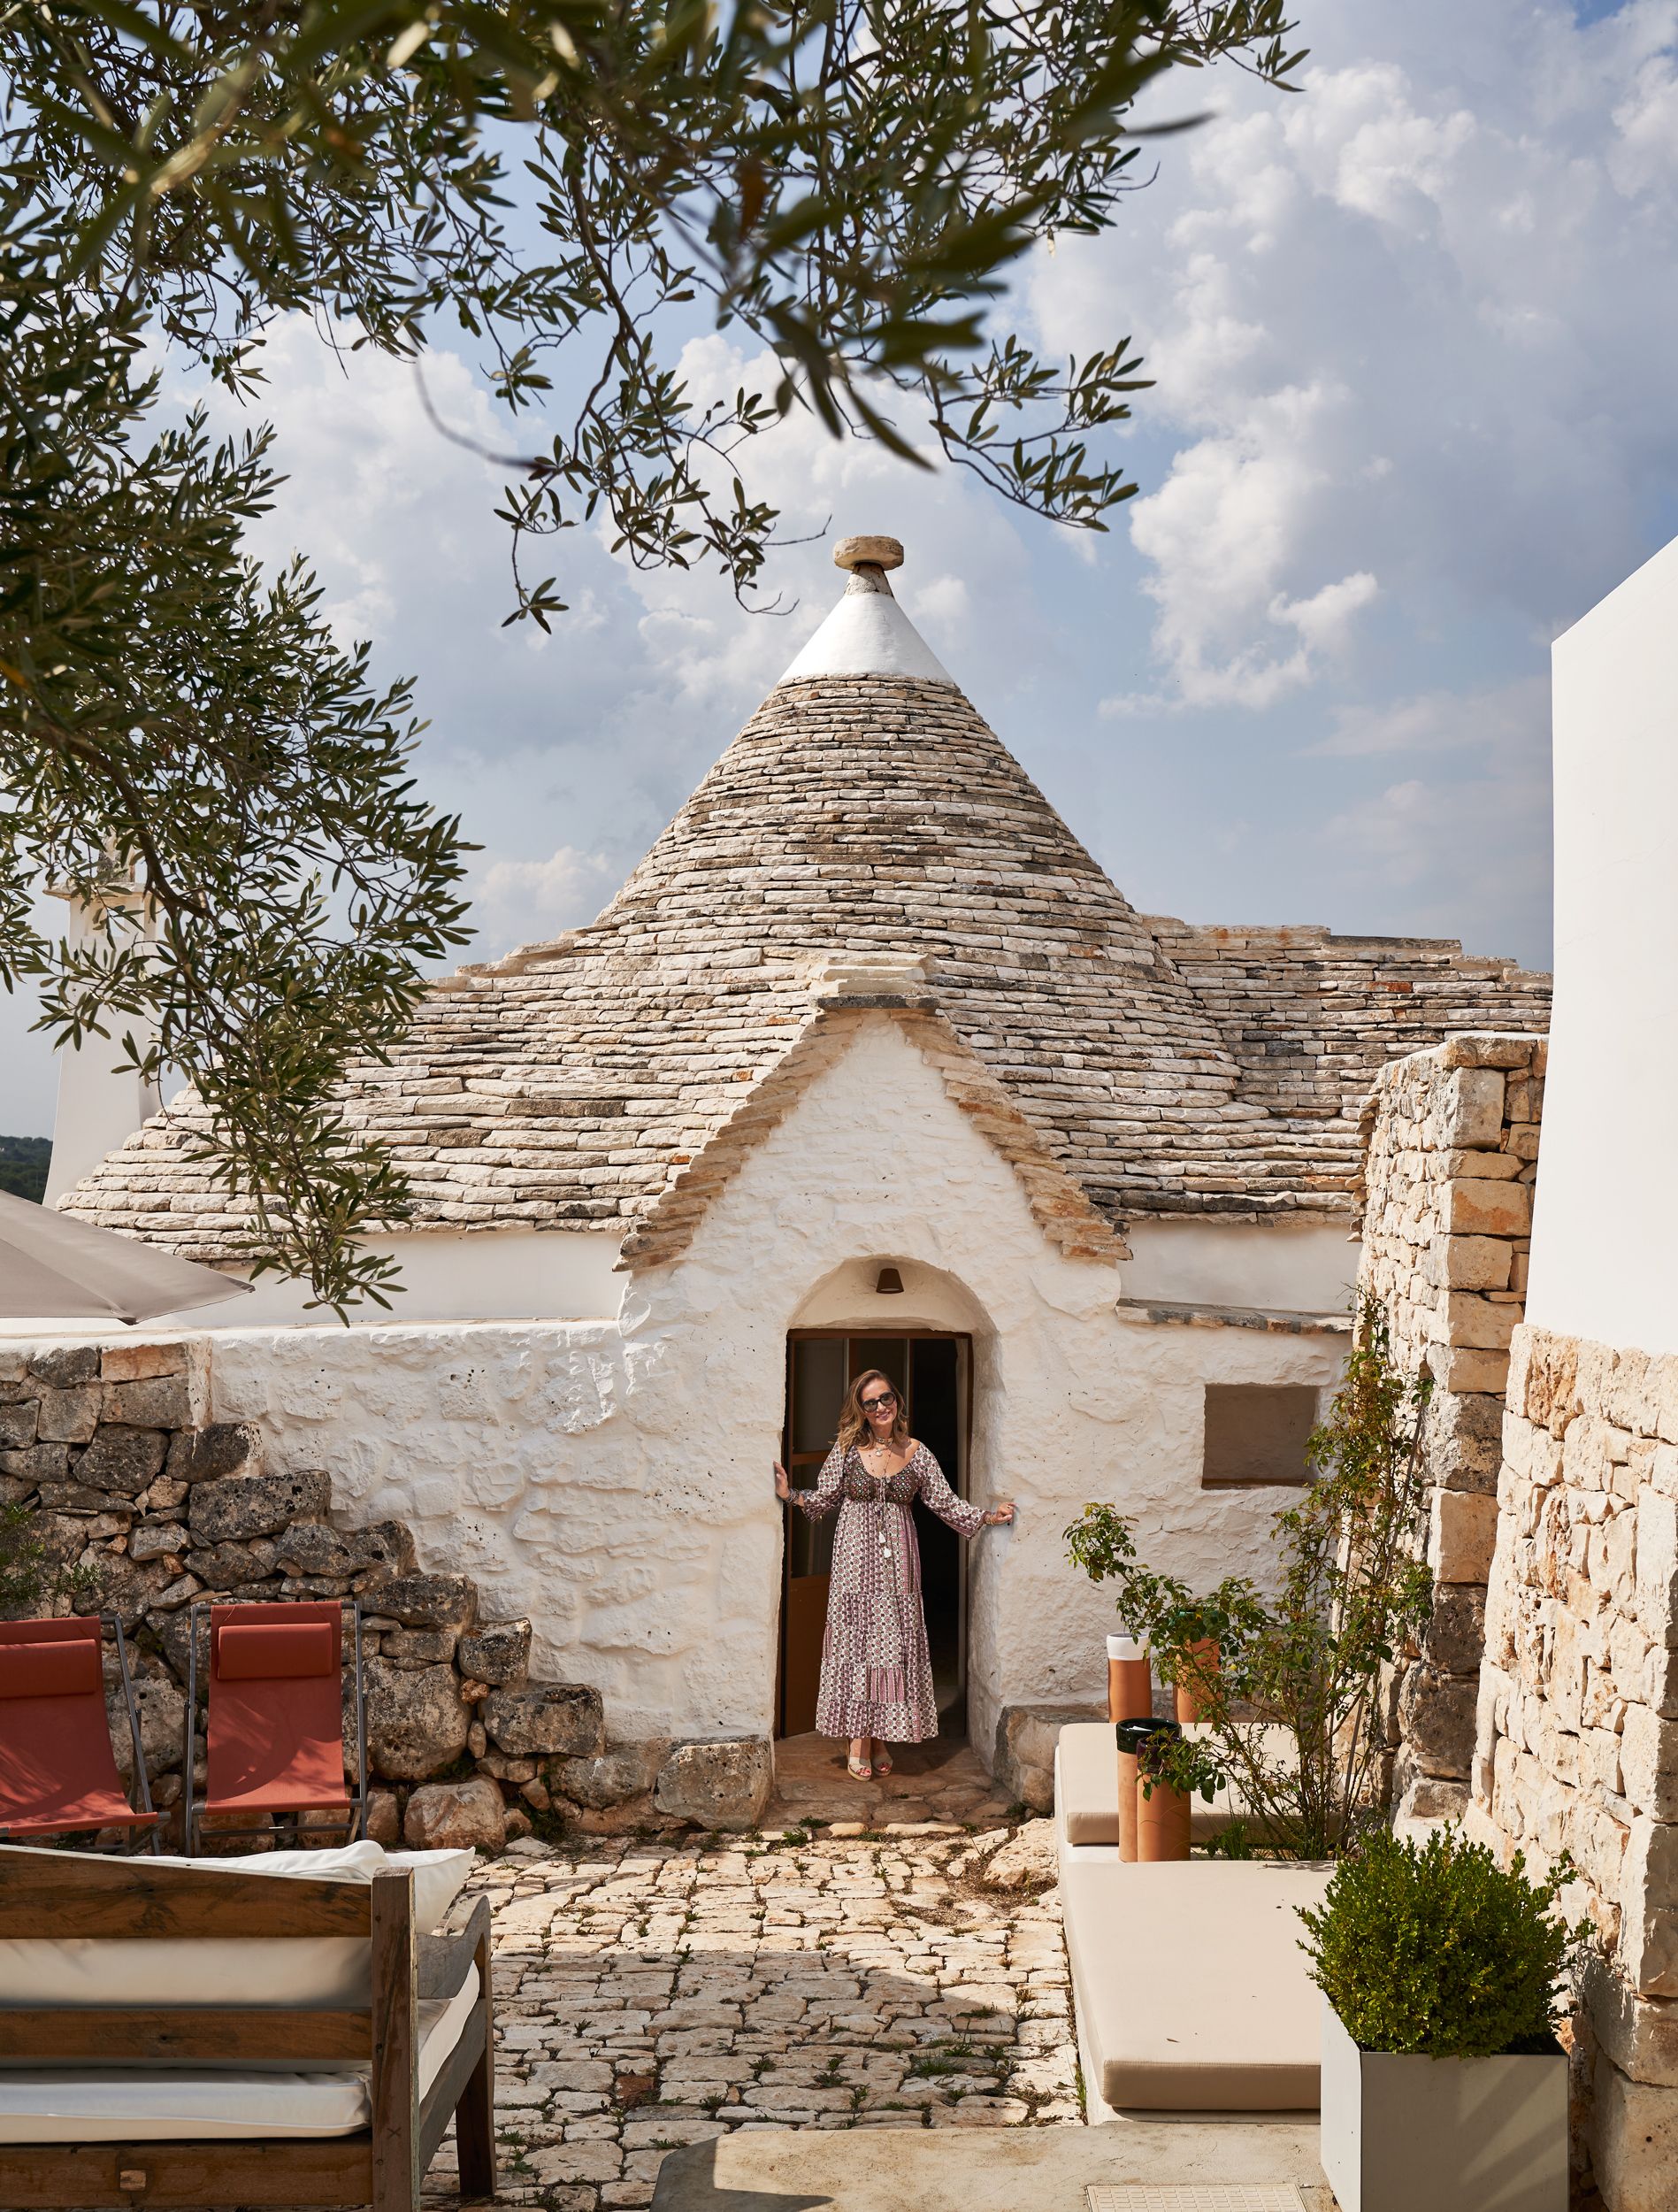 See a Centuries-Old House in Puglia Transformed